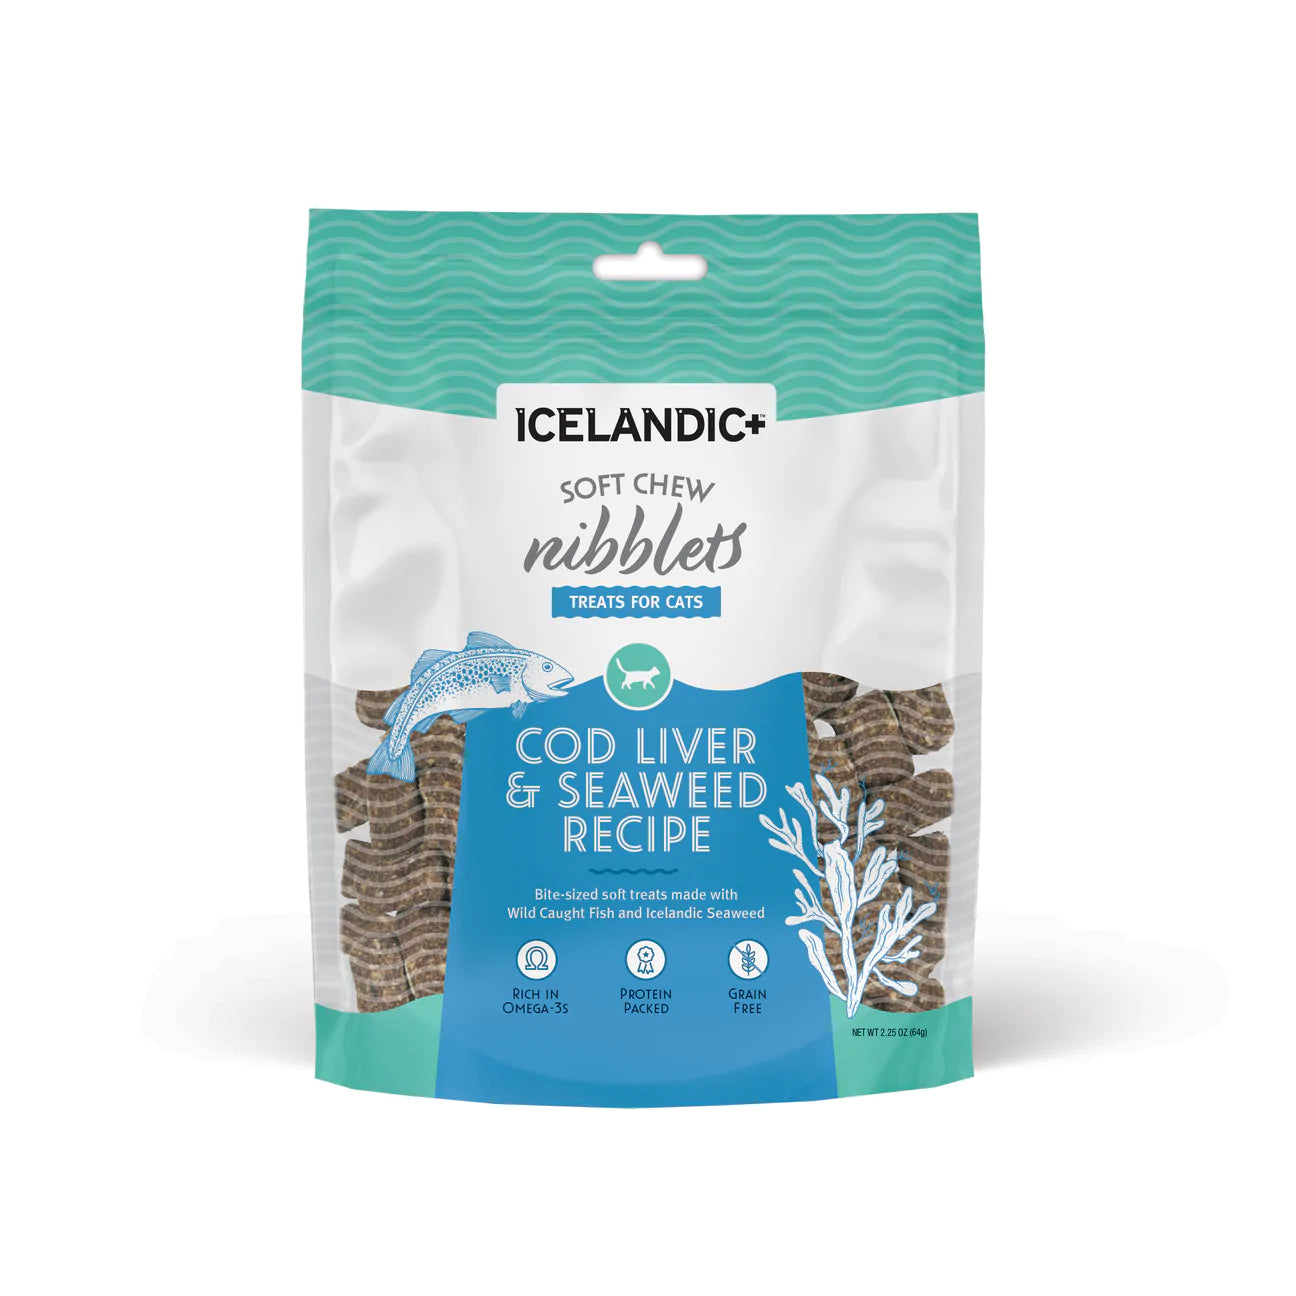 Icelandic+ - Soft Chew Nibblets Cod Liver & Seaweed Treats For Cats